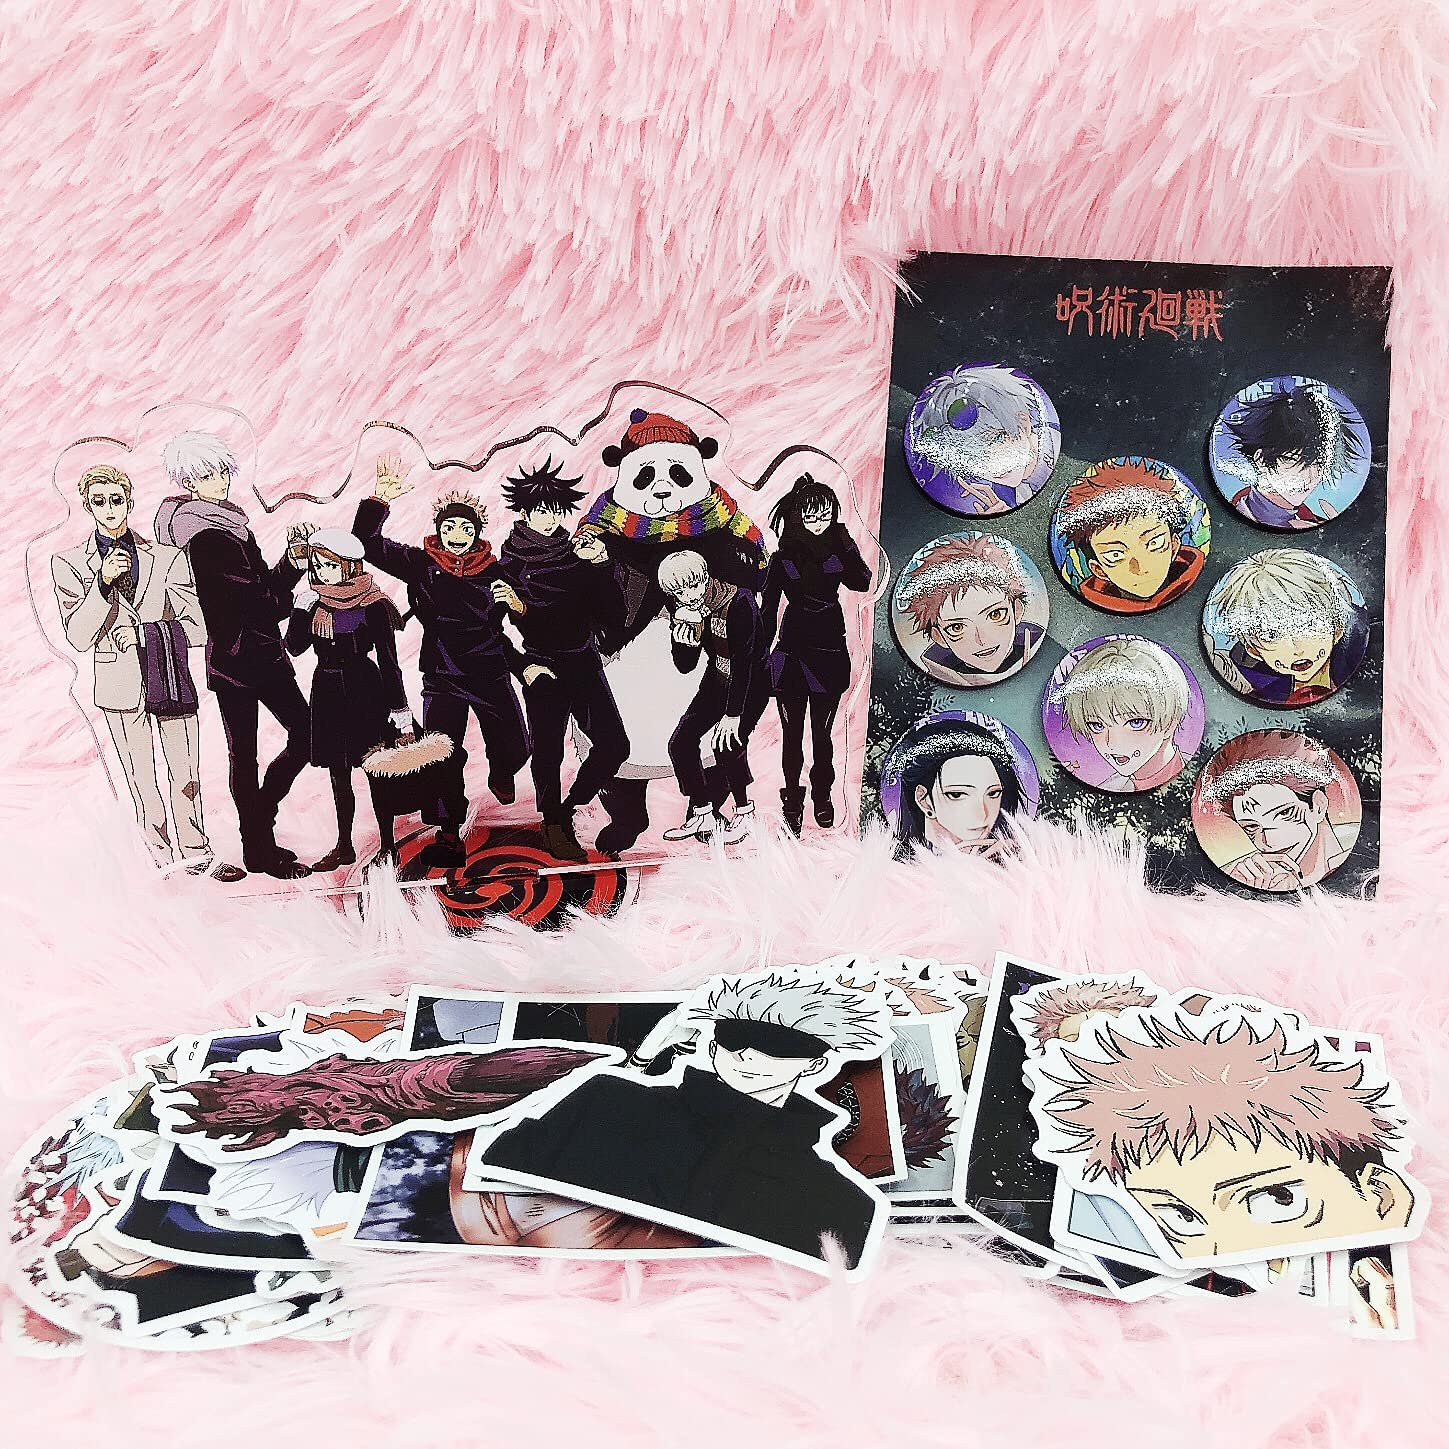 Jujutsu Kaisen Official Store: One Question You don't Want to Ask Anymore